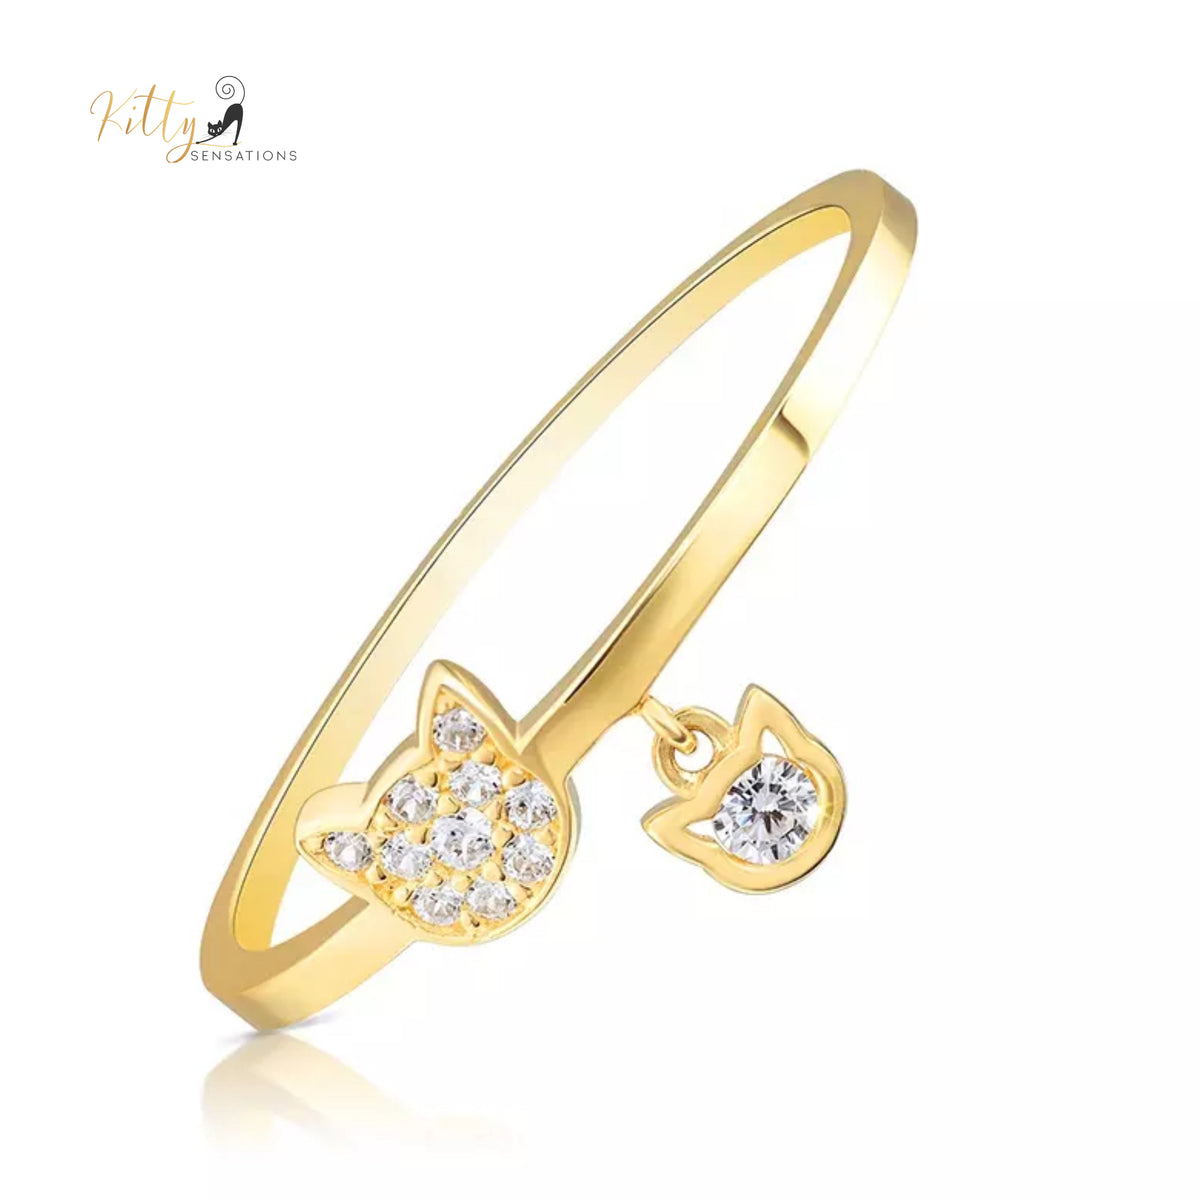 CZ Cat Ring with Hanging Cat Charm in Solid 925 Sterling Silver and 18K Gold Plating ($60.95): https://www.kittysensations.com/products/18k-cz-cat-ring-with-shiny-hanging-cat-charm?_pos=1&_psq=cz+cat+ring+han&_ss=e&_v=1.0